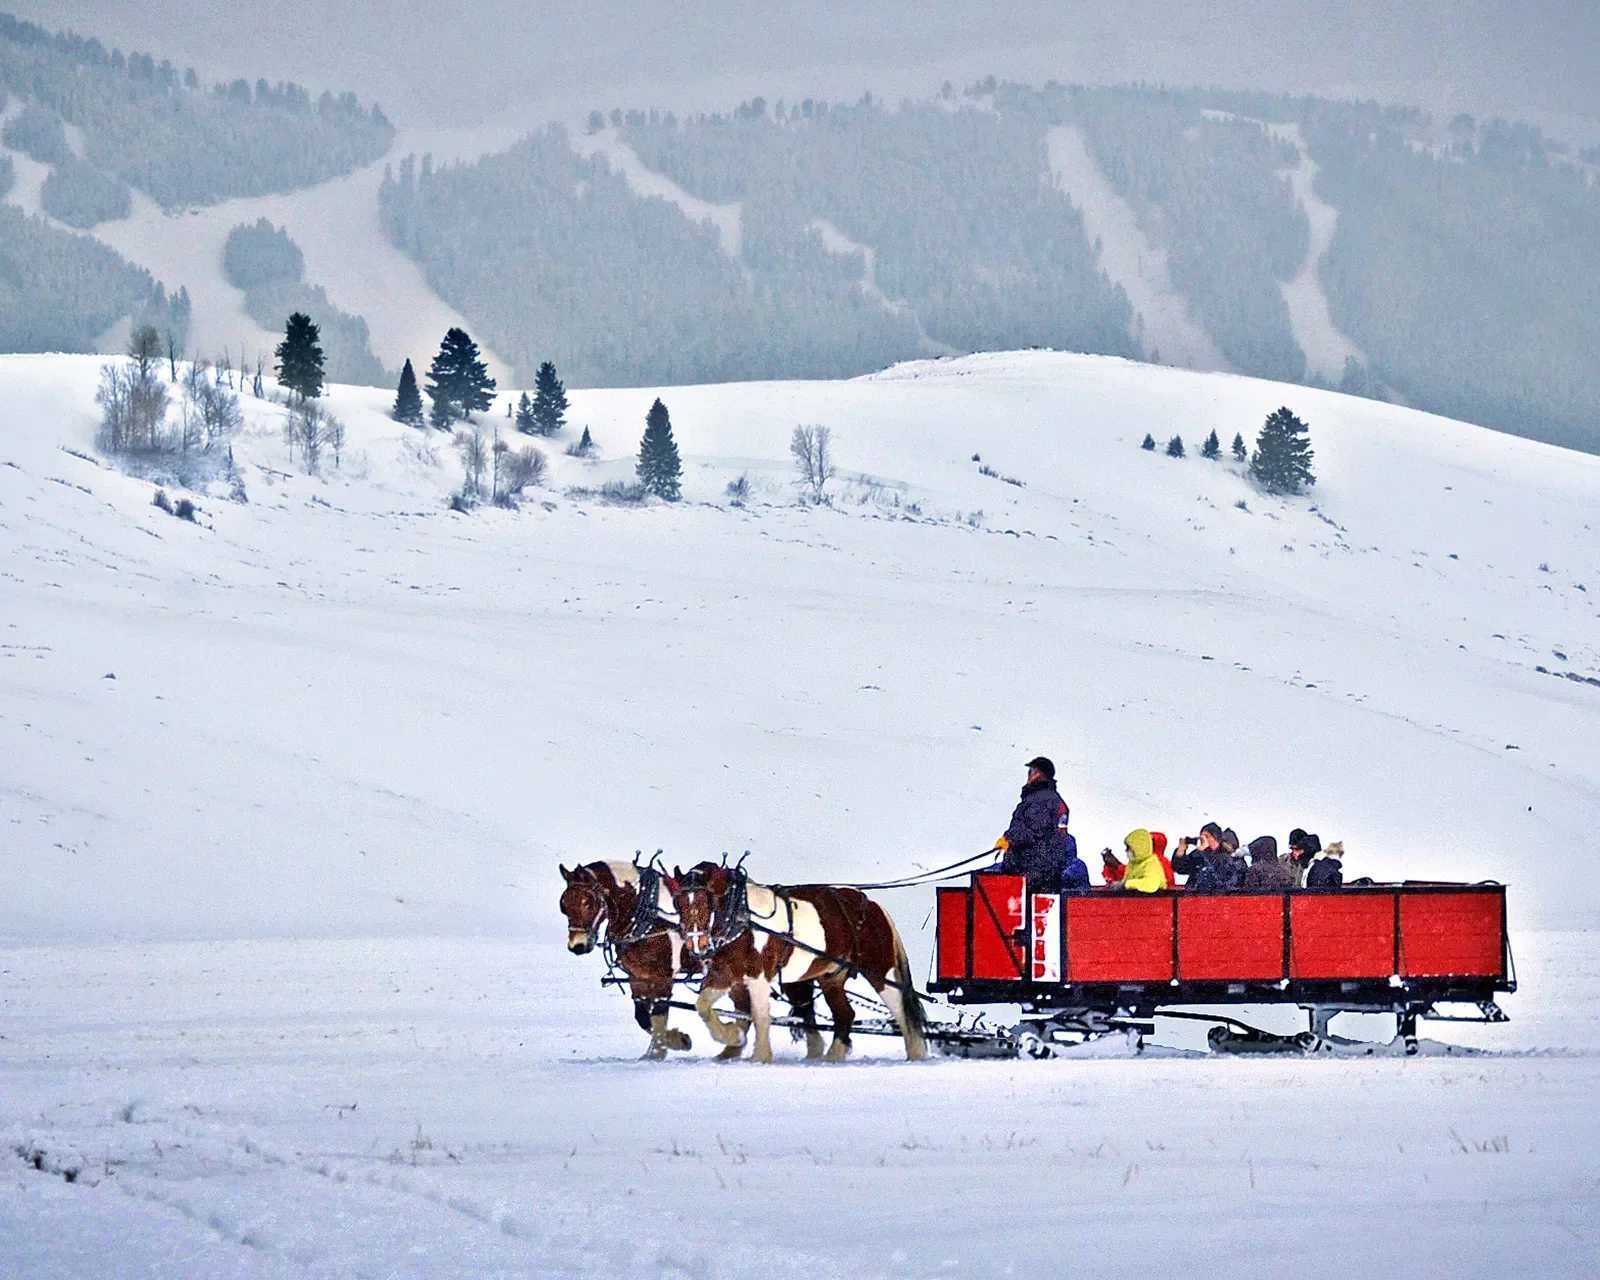 Backroads guests being transported across snowy landscape by horses